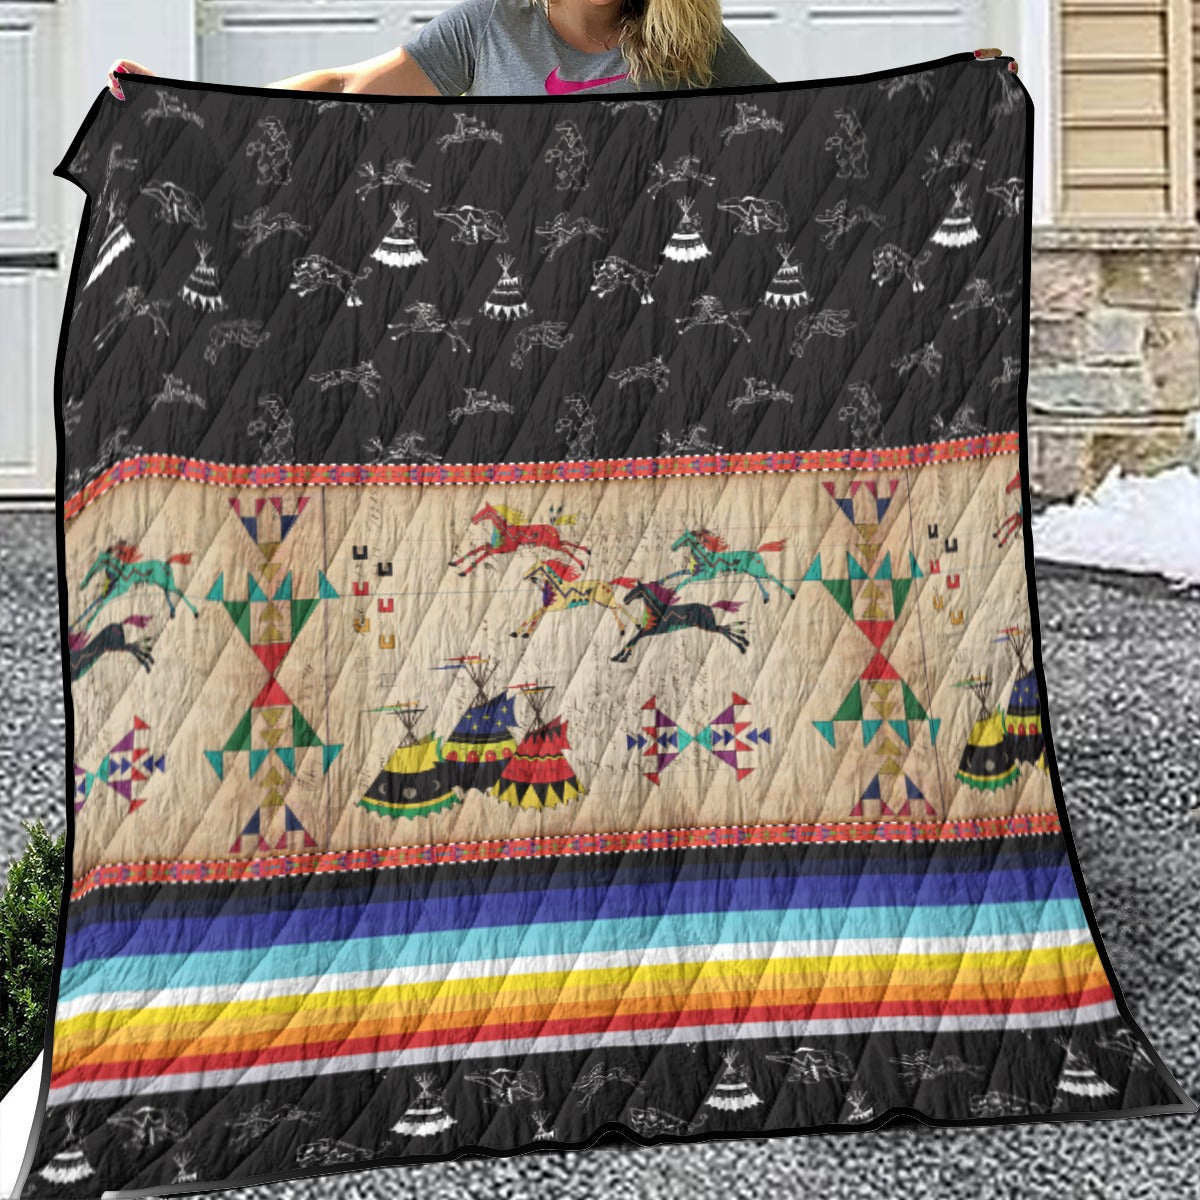 Horses Running Black Sky 2 Lightweight & Breathable Quilt With Edge-wrapping Strips